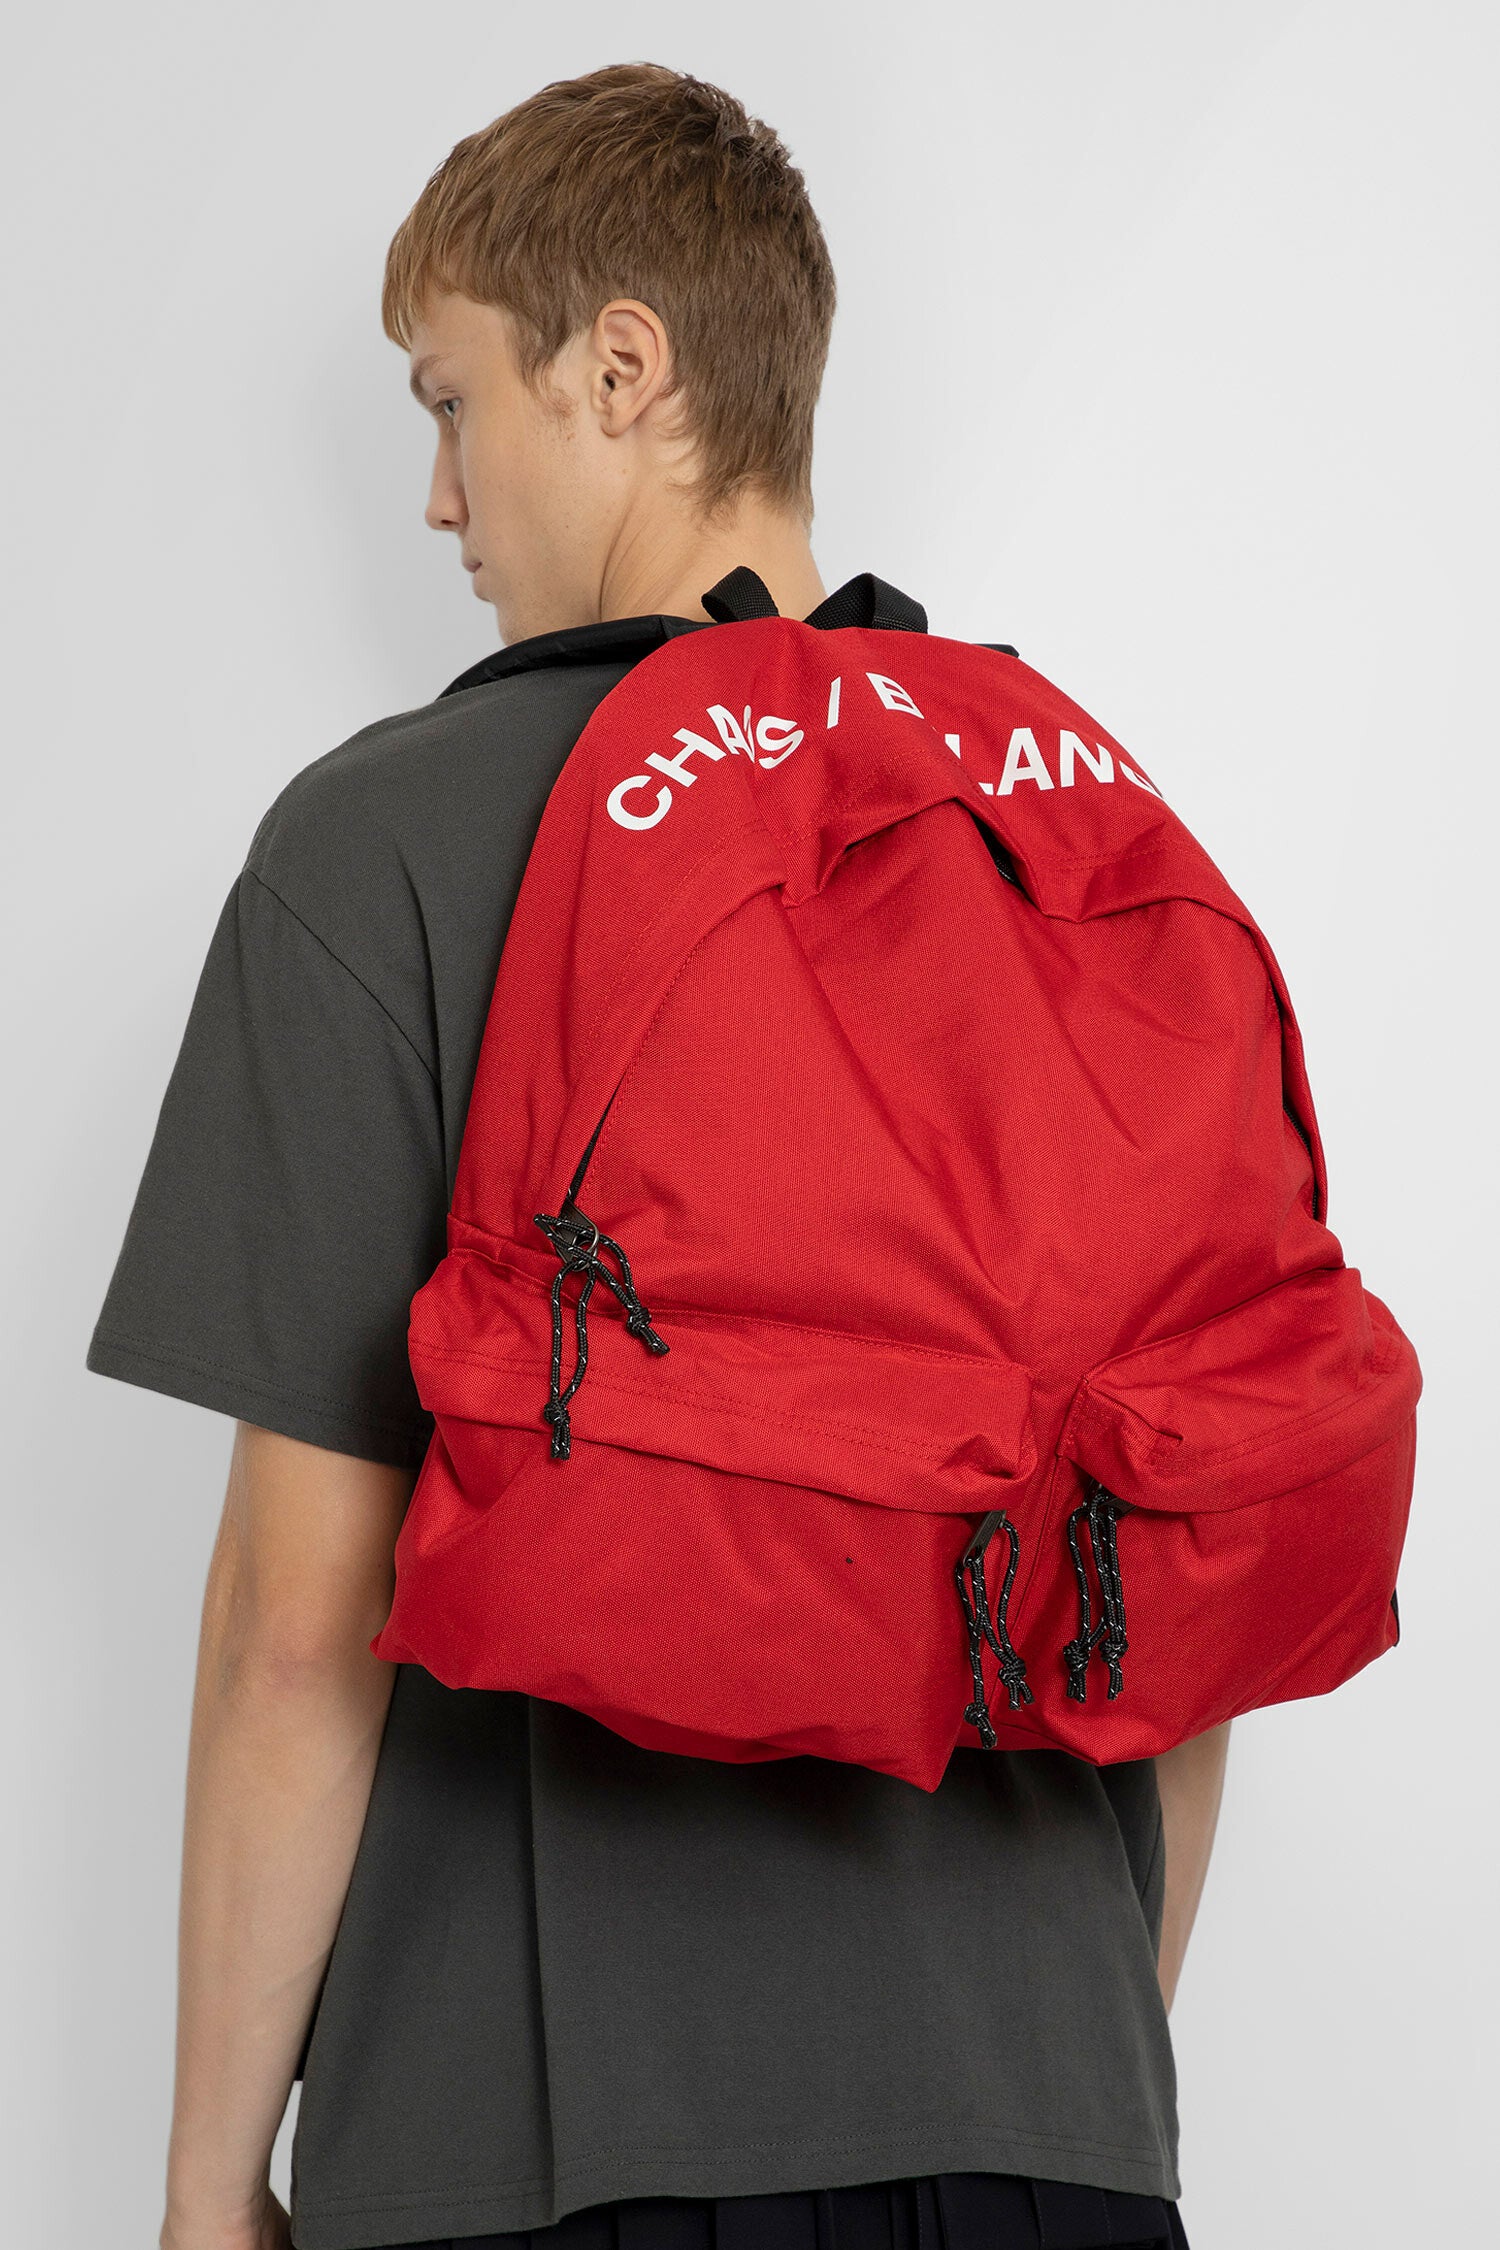 UNDERCOVER MAN RED BACKPACKS & TRAVEL BAGS